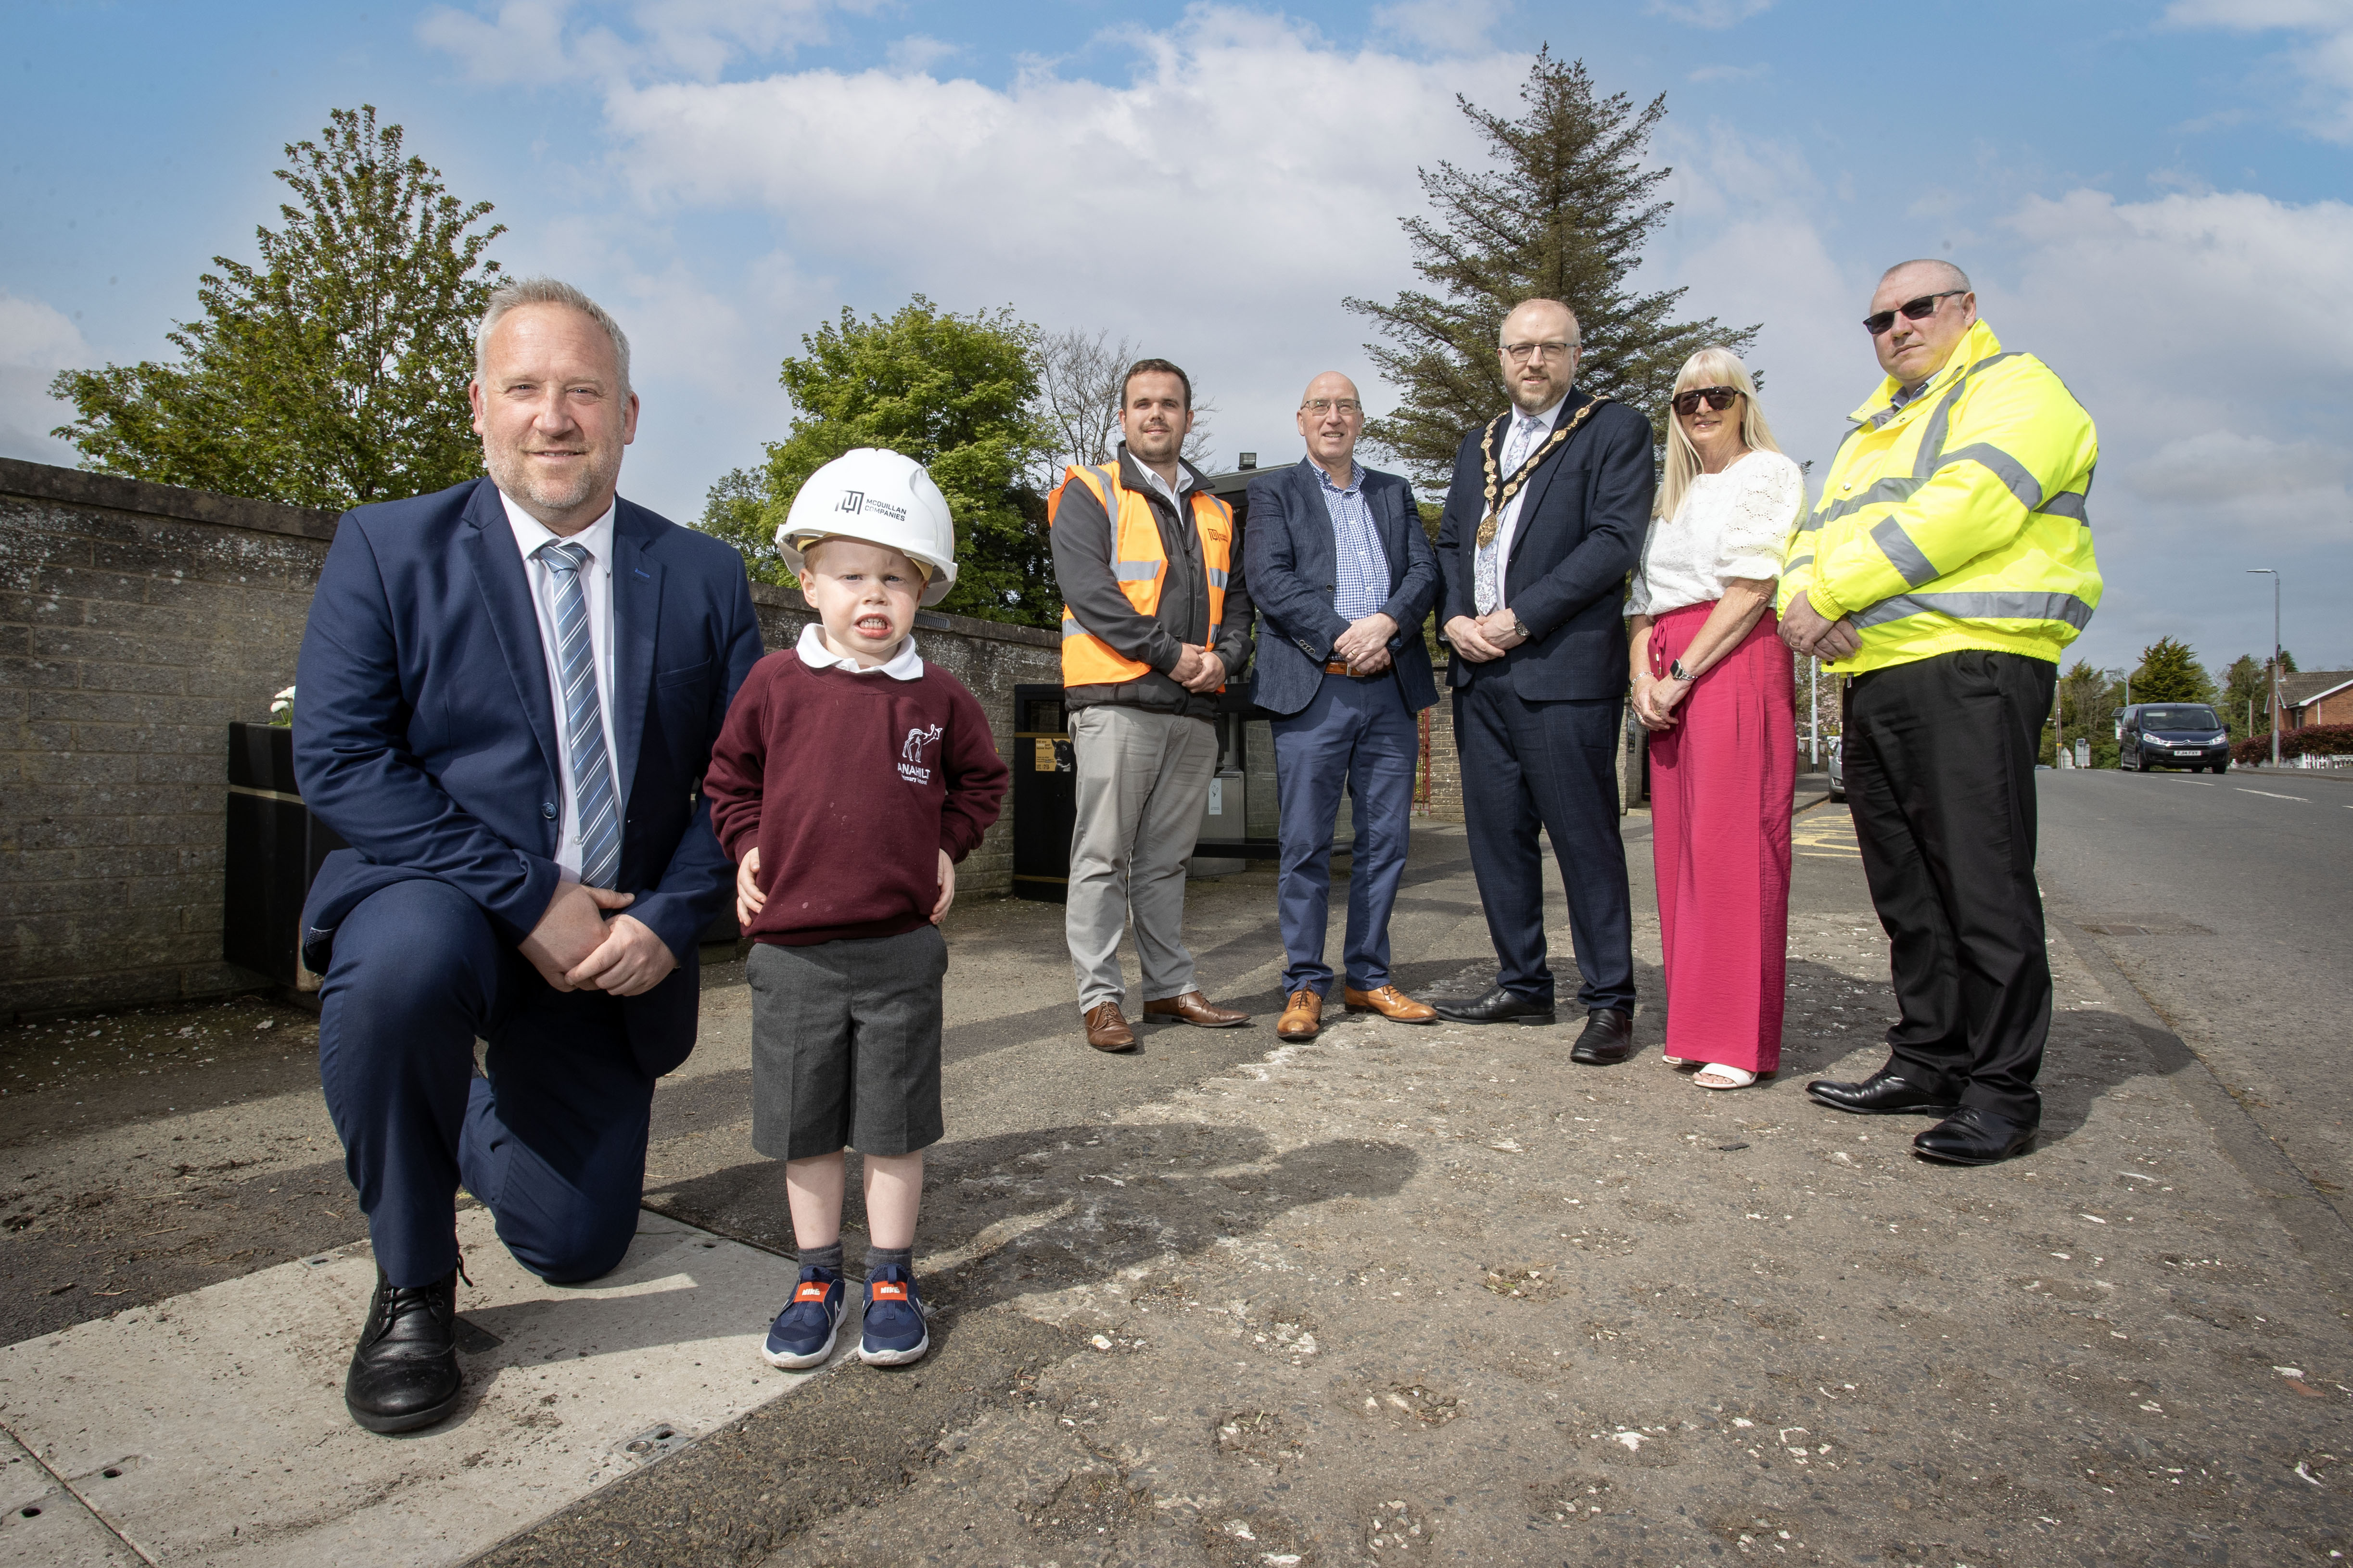 Principal of Anahilt Primary School, Andy Smyth; Oliver Evans, pupil; Adam McCormick, John McQuillan Contracts Ltd, Cllr John Lavery, BEM, Chair of Regeneration and Growth Committee, Cllr Andrew Gowan, Mayor of Lisburn & Castlereagh City Council, Viki Bell, Department for Communities and Billy Cardwell Dept for Infrastructure.